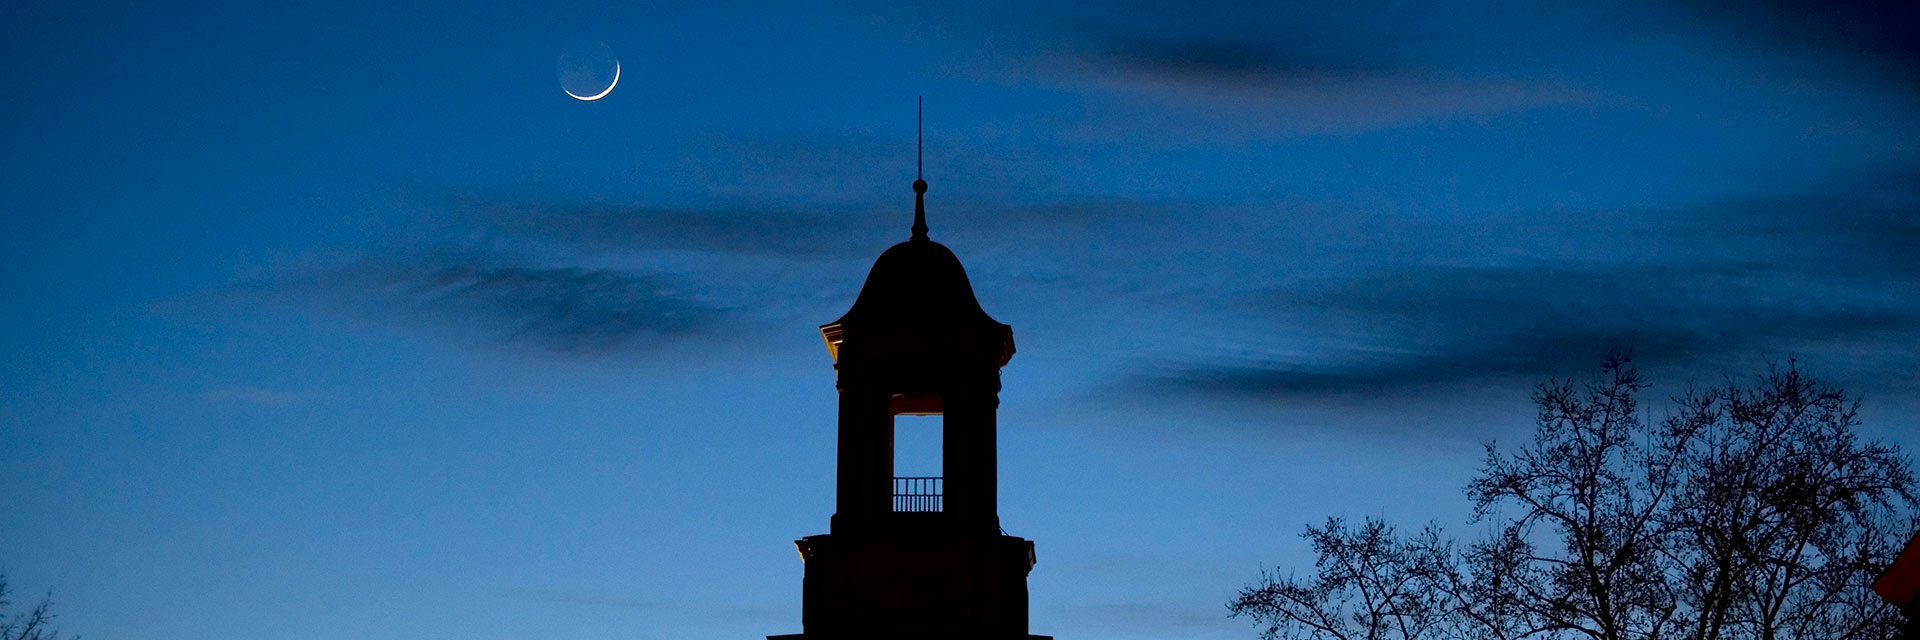 cupola at dusk with sliver moon header